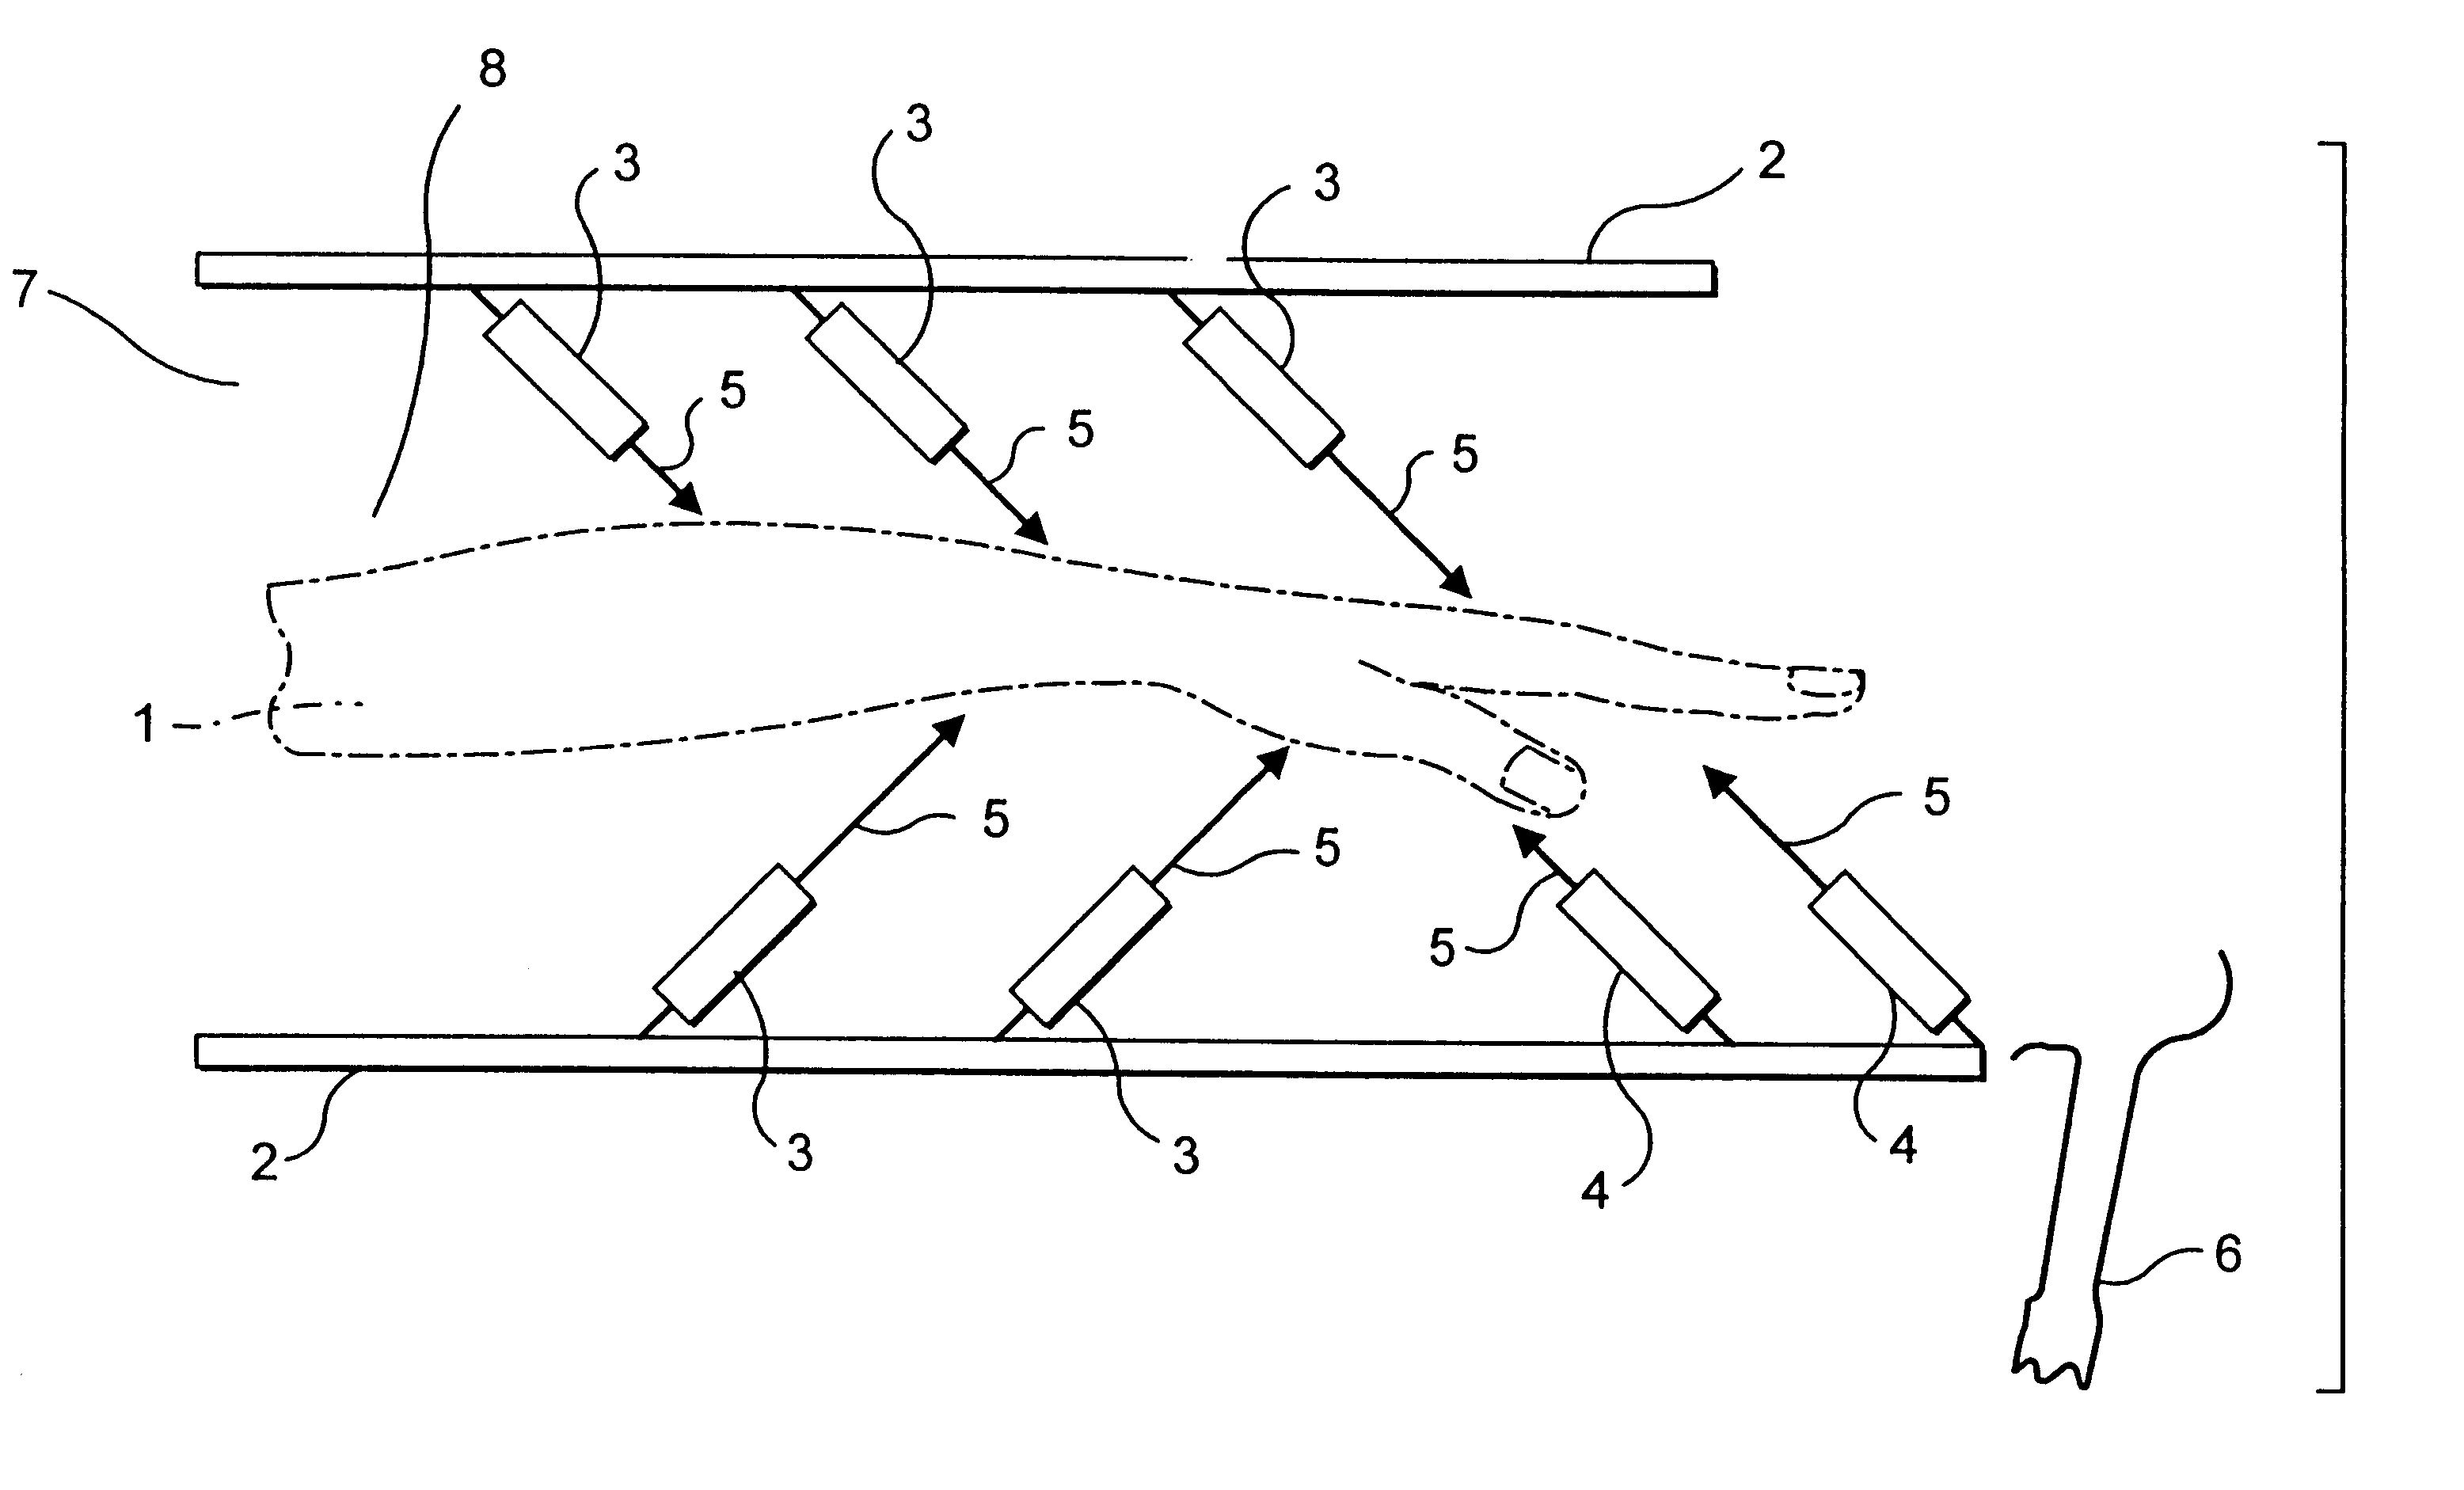 Method of removing contaminants from an epidermal surface using an oscillating fluidic spray